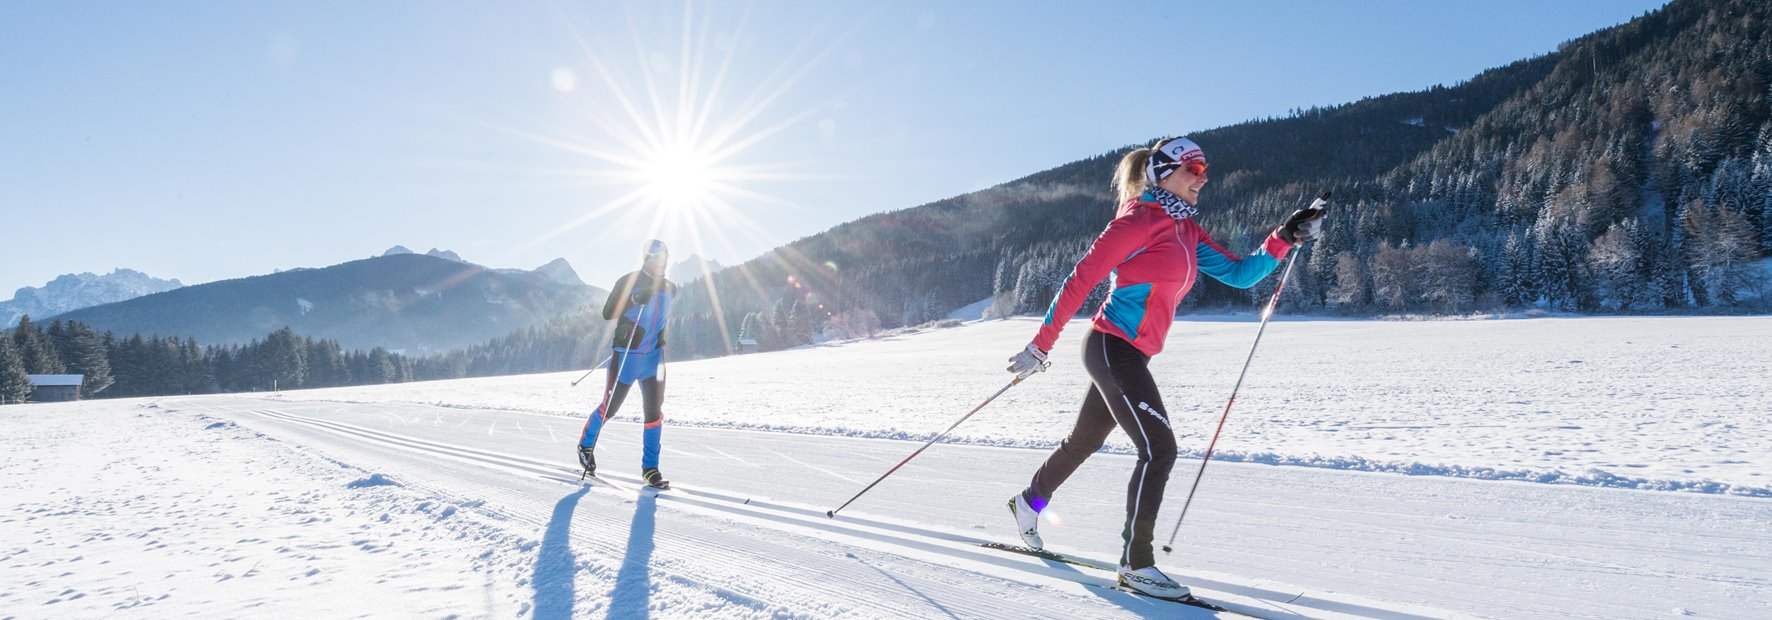 Being active in nature – cross-country skiing, biking, skiing and much more.